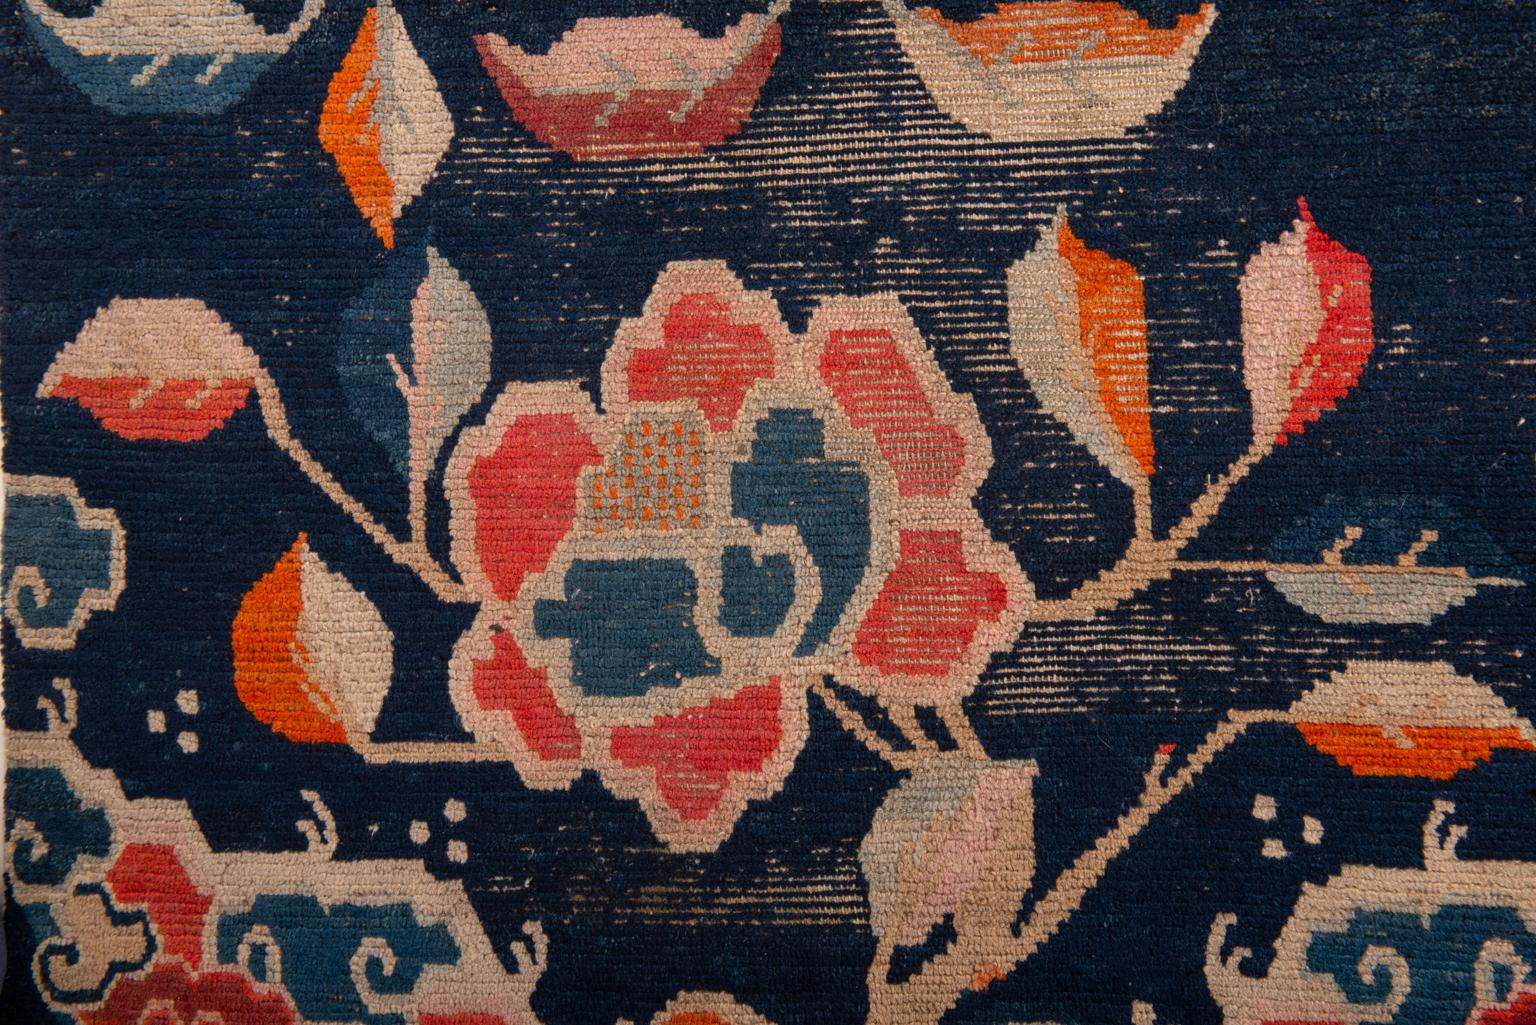 Tibetan Antique Carpet from Private Collection 1